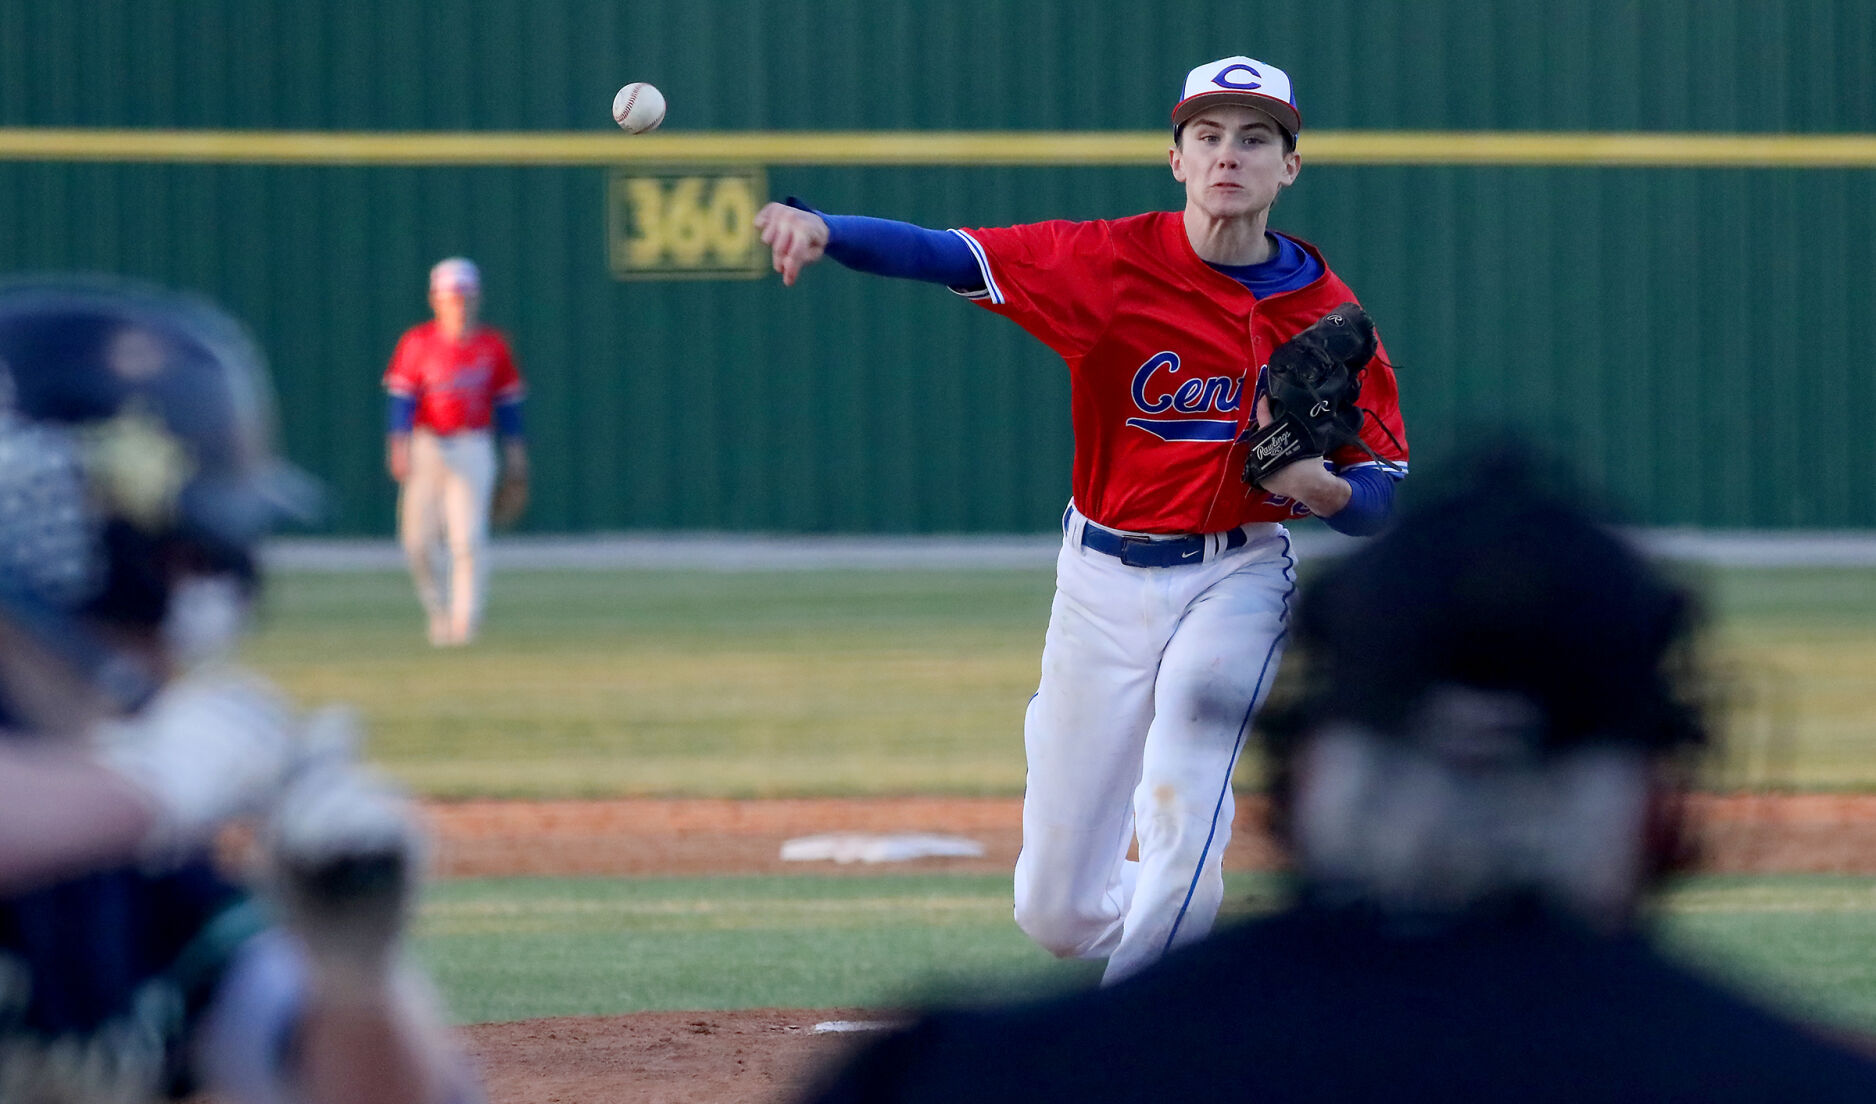 Madison Central and Southern Dominate high school baseball; Lady Eagles lose in extras